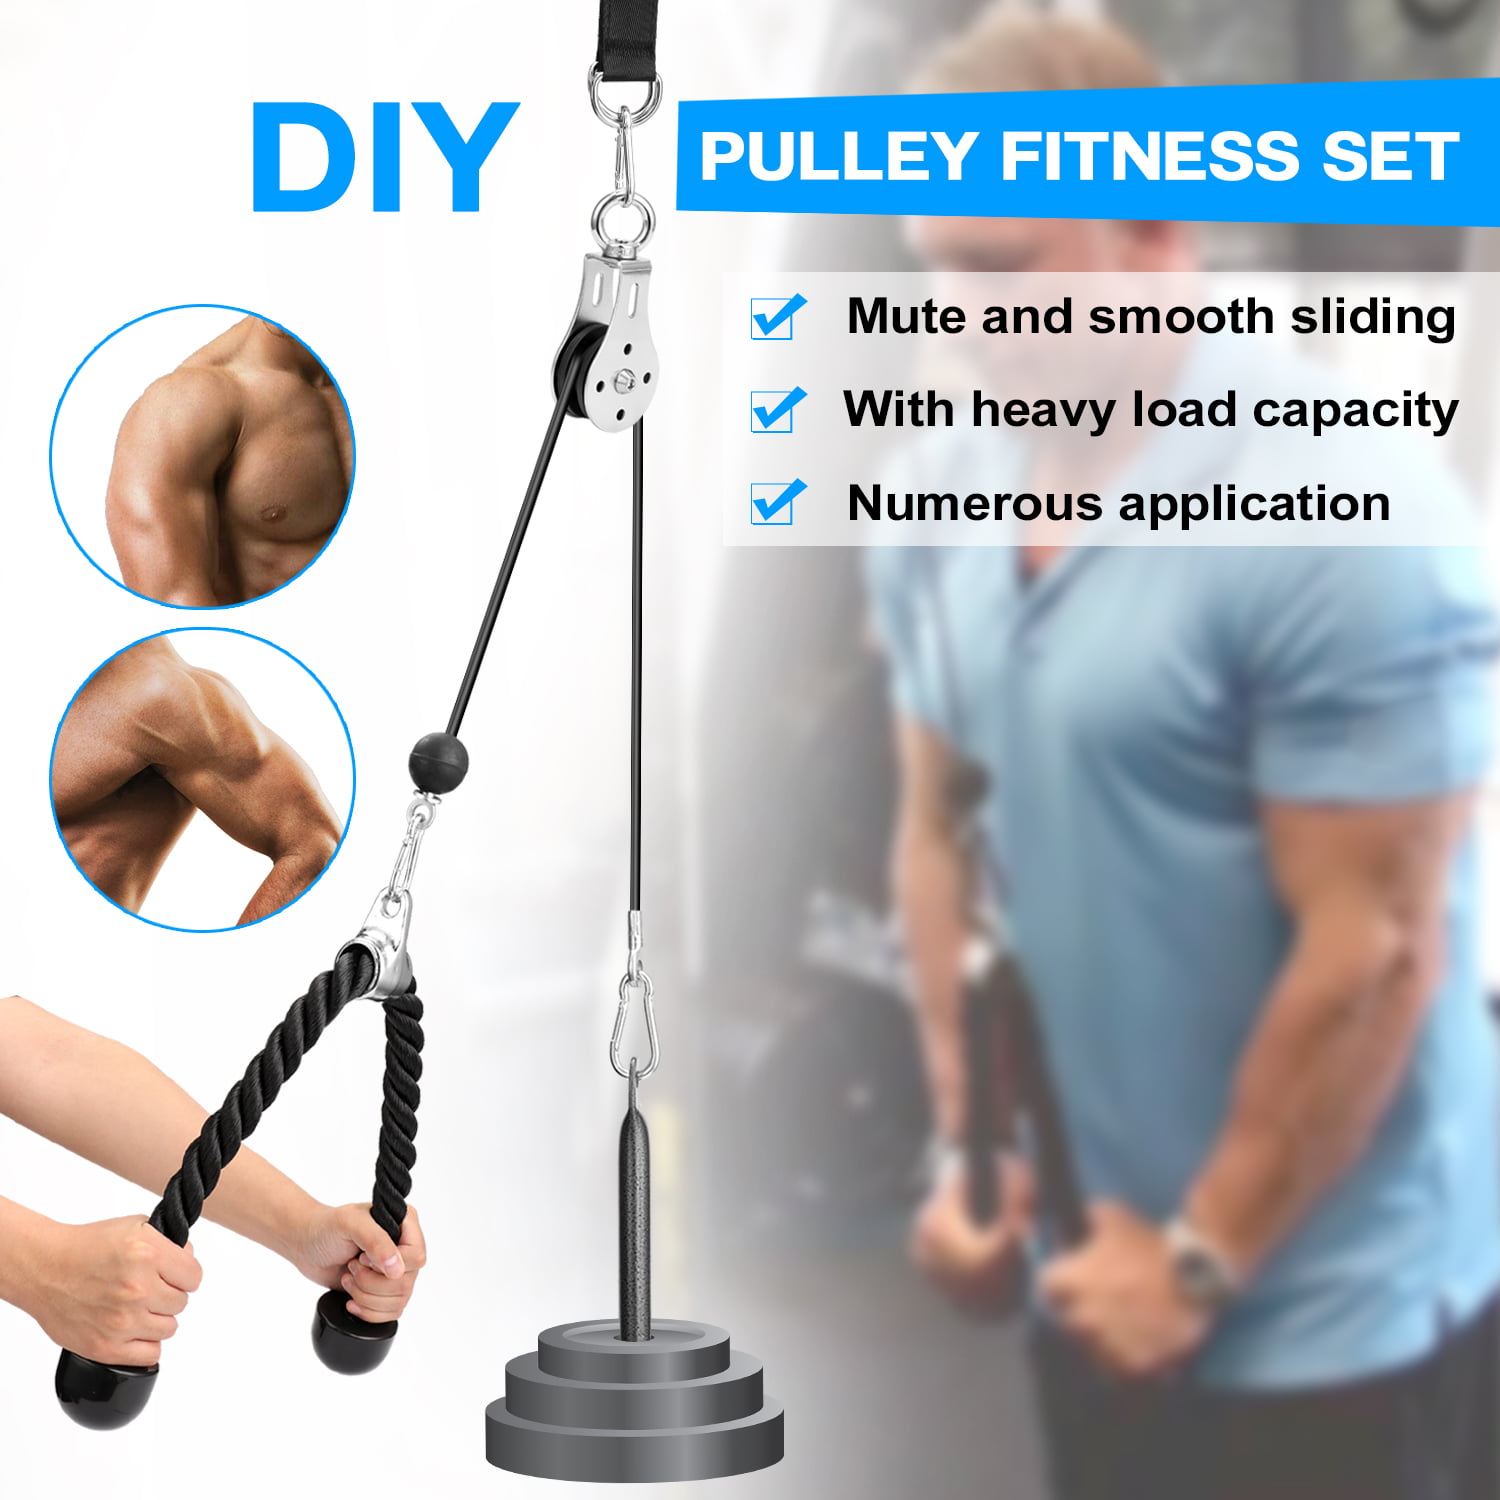 Biceps Curl Shoulder-Home Gym Back Cable Machine with Upgraded Loading Pin for Triceps Pull Down YUPING 11PC Lifting Forearm Arm Strength Fitness Equipment Fitness Lift Pulley System Forearm